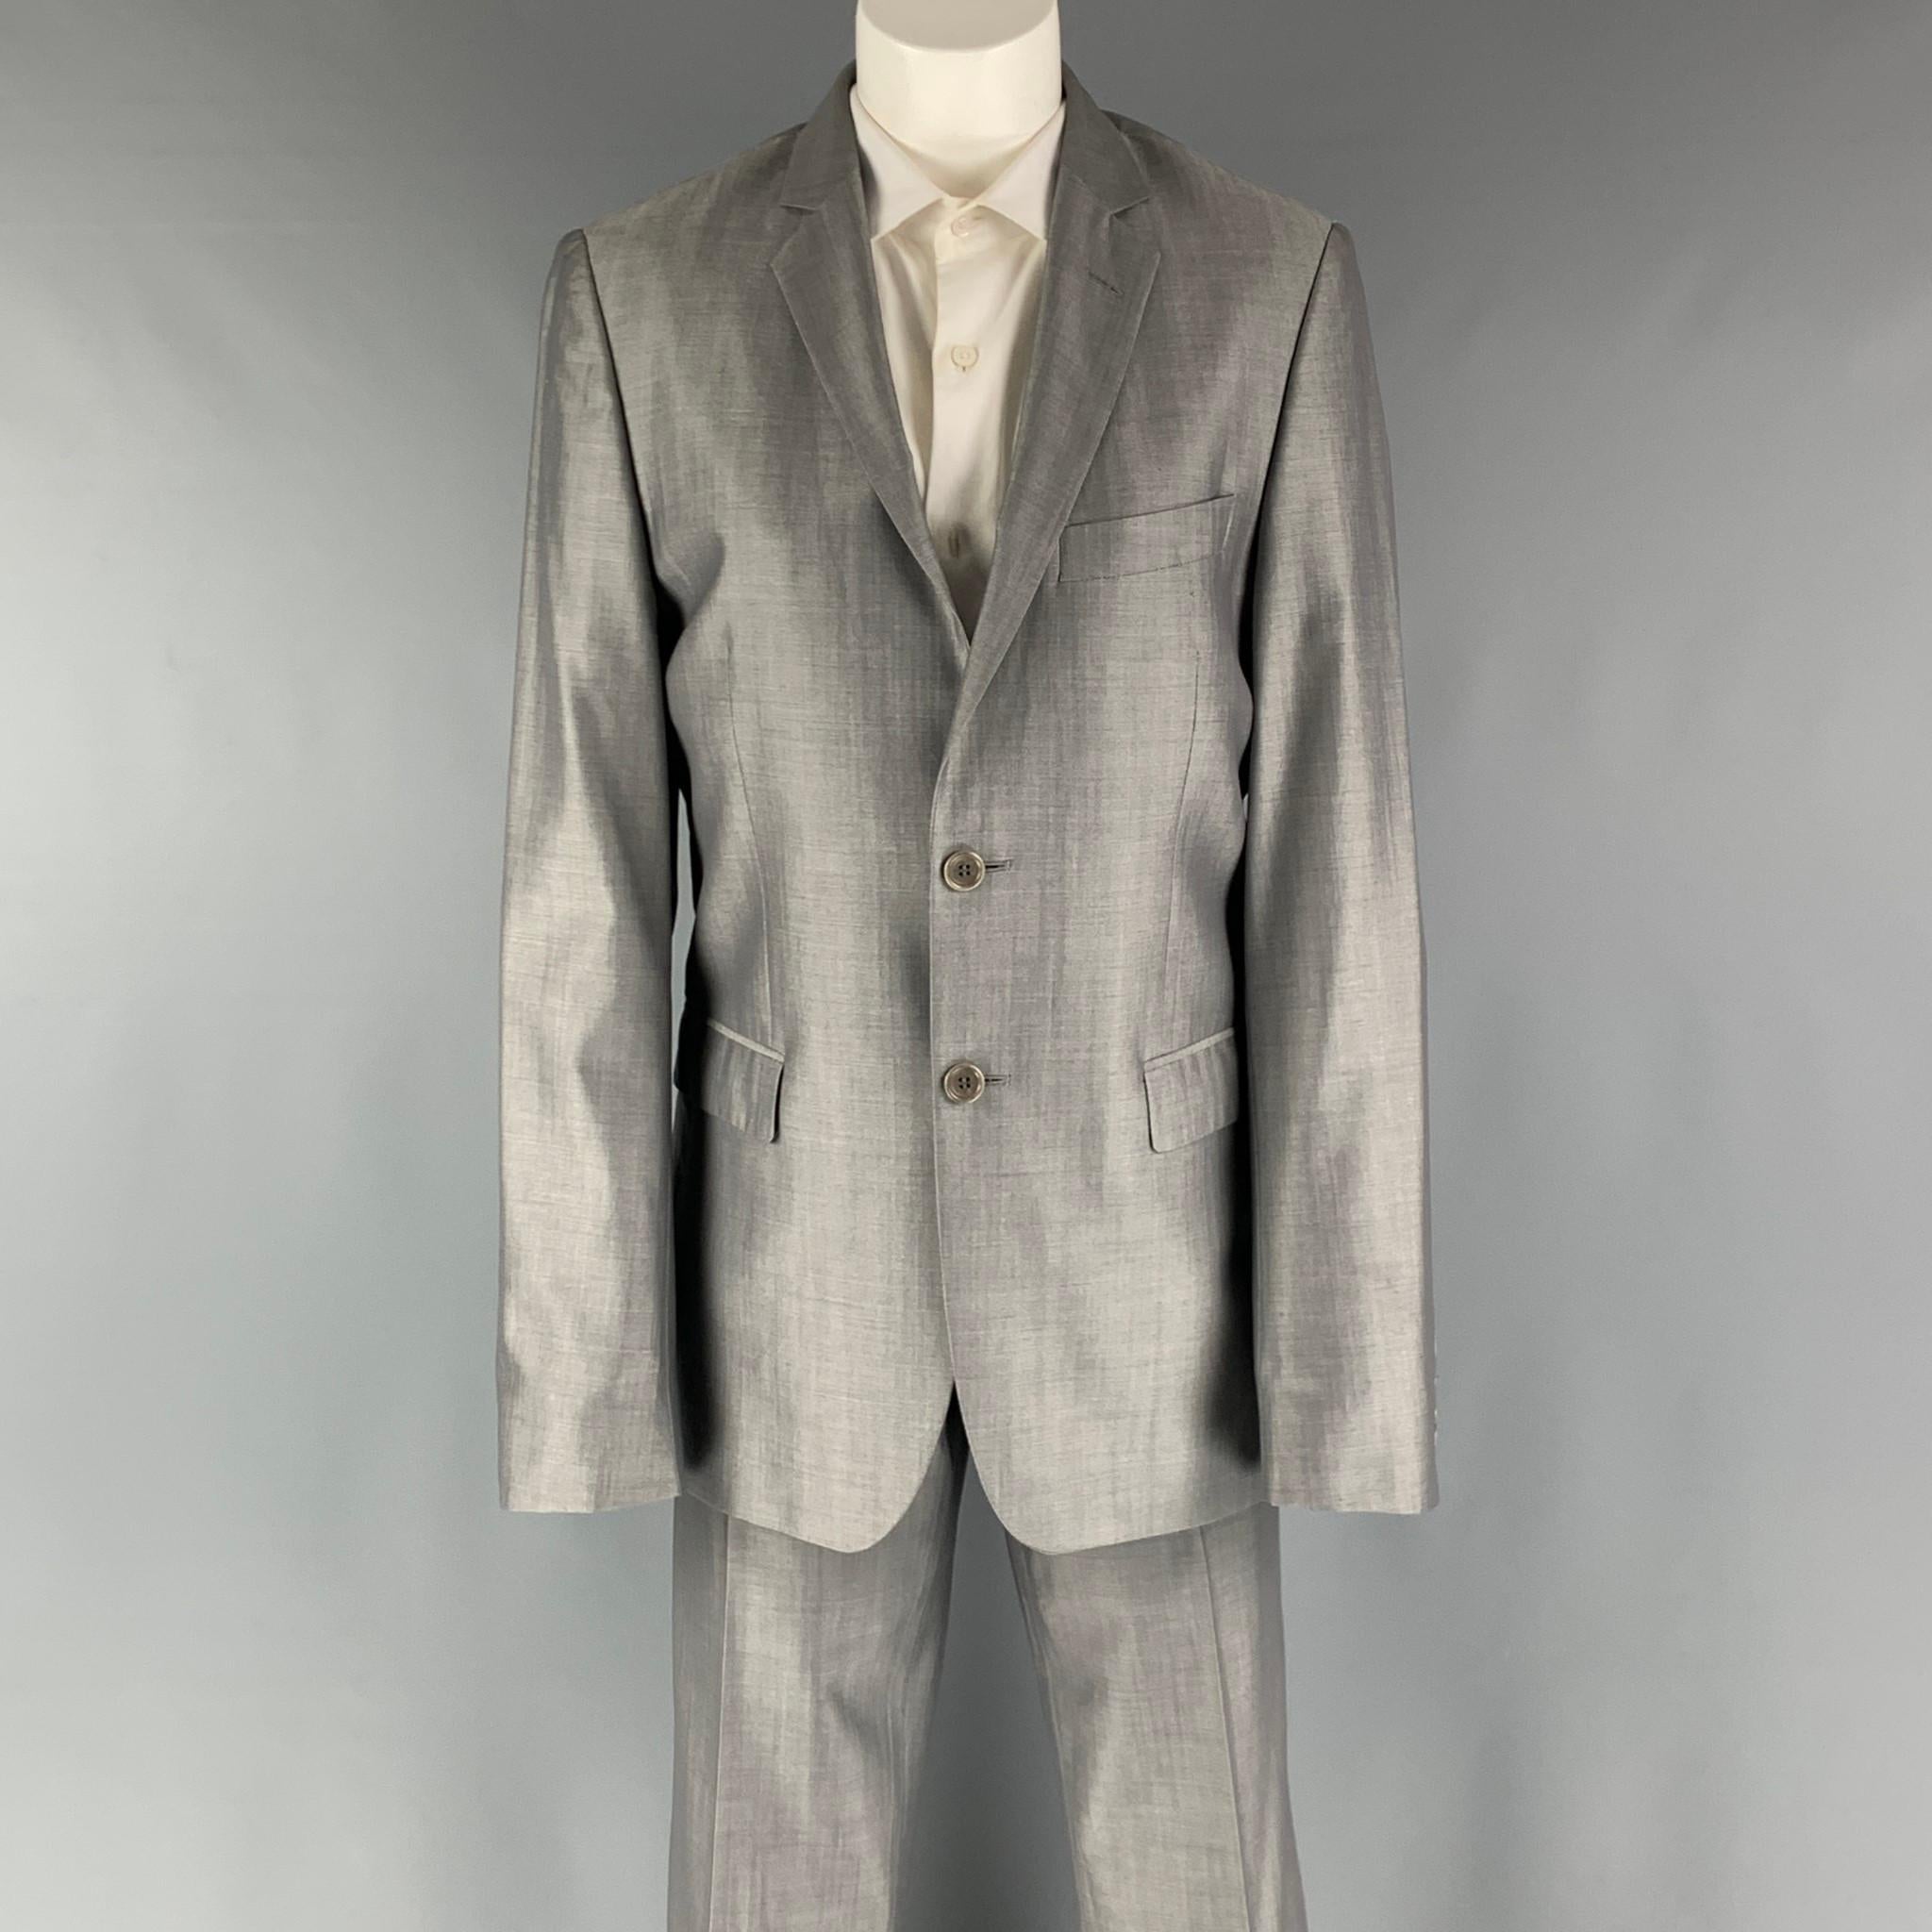 SPONTINI suit comes in a grey shimmery wool and silk woven material with a full liner and includes a single breasted, double button suit with a notch lapel and matching flat front trousers.

Excellent Pre- Owned Conditions.
Marked: